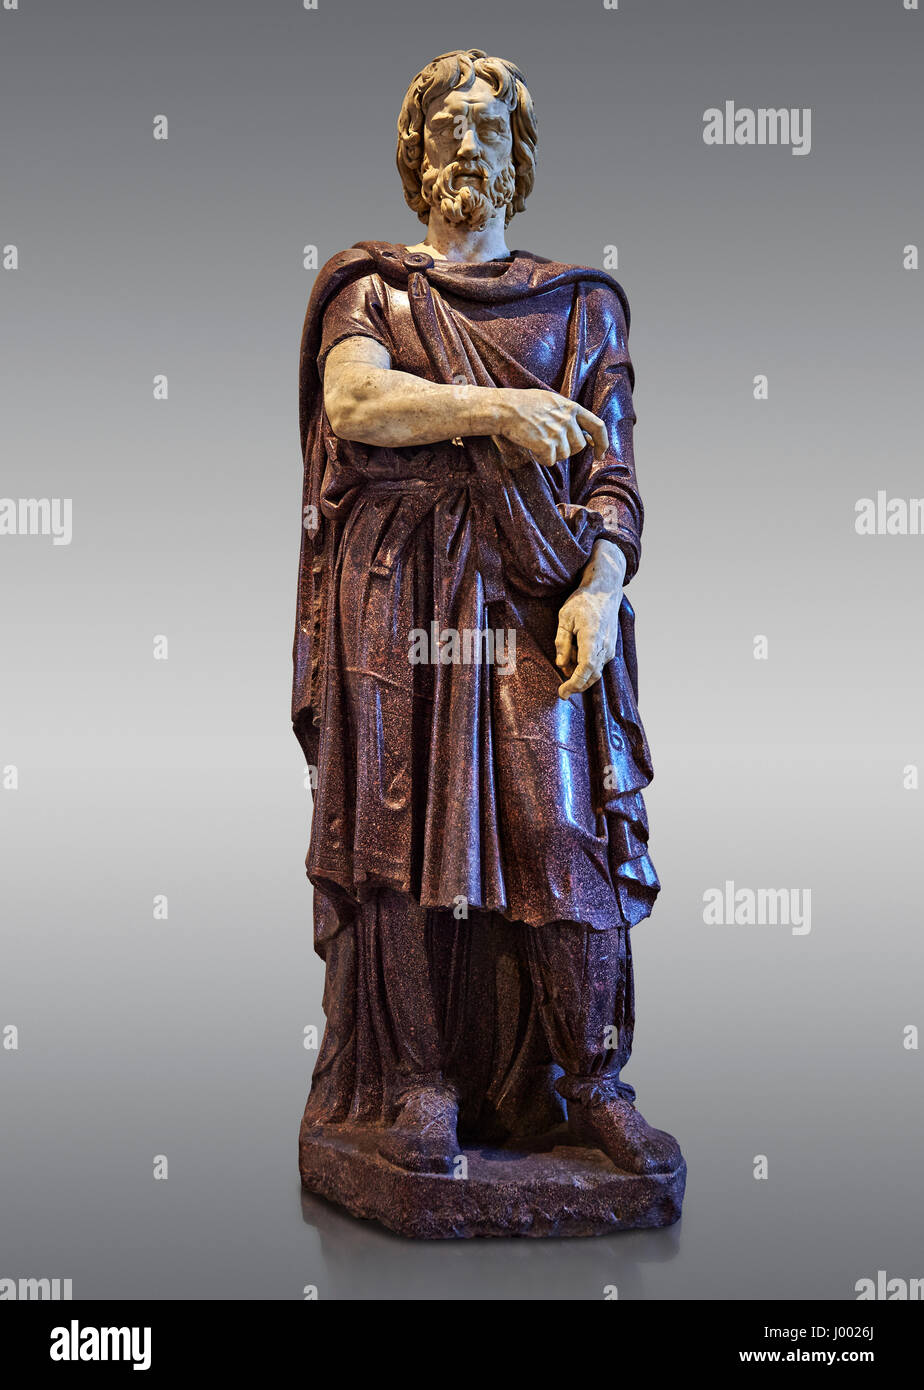 Statue of a Captive Barbarian - 2nd century Ad Roman sculpture made in Porphyry. Inv No. MR 331 or Ma 1385, Louvre Museum, Paris. Stock Photo